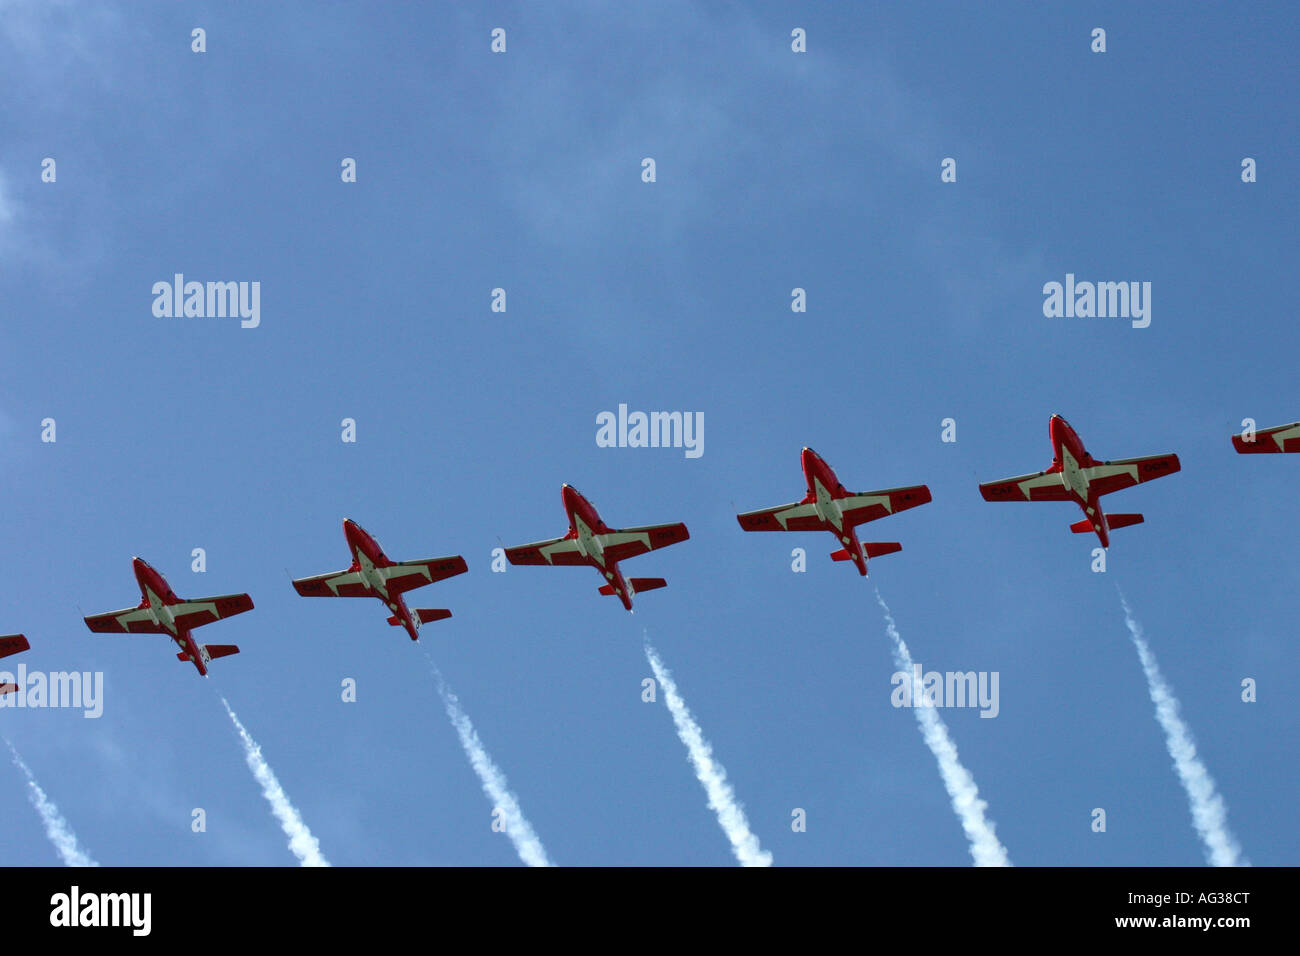 Snowbirds flying team in Formation Stock Photo